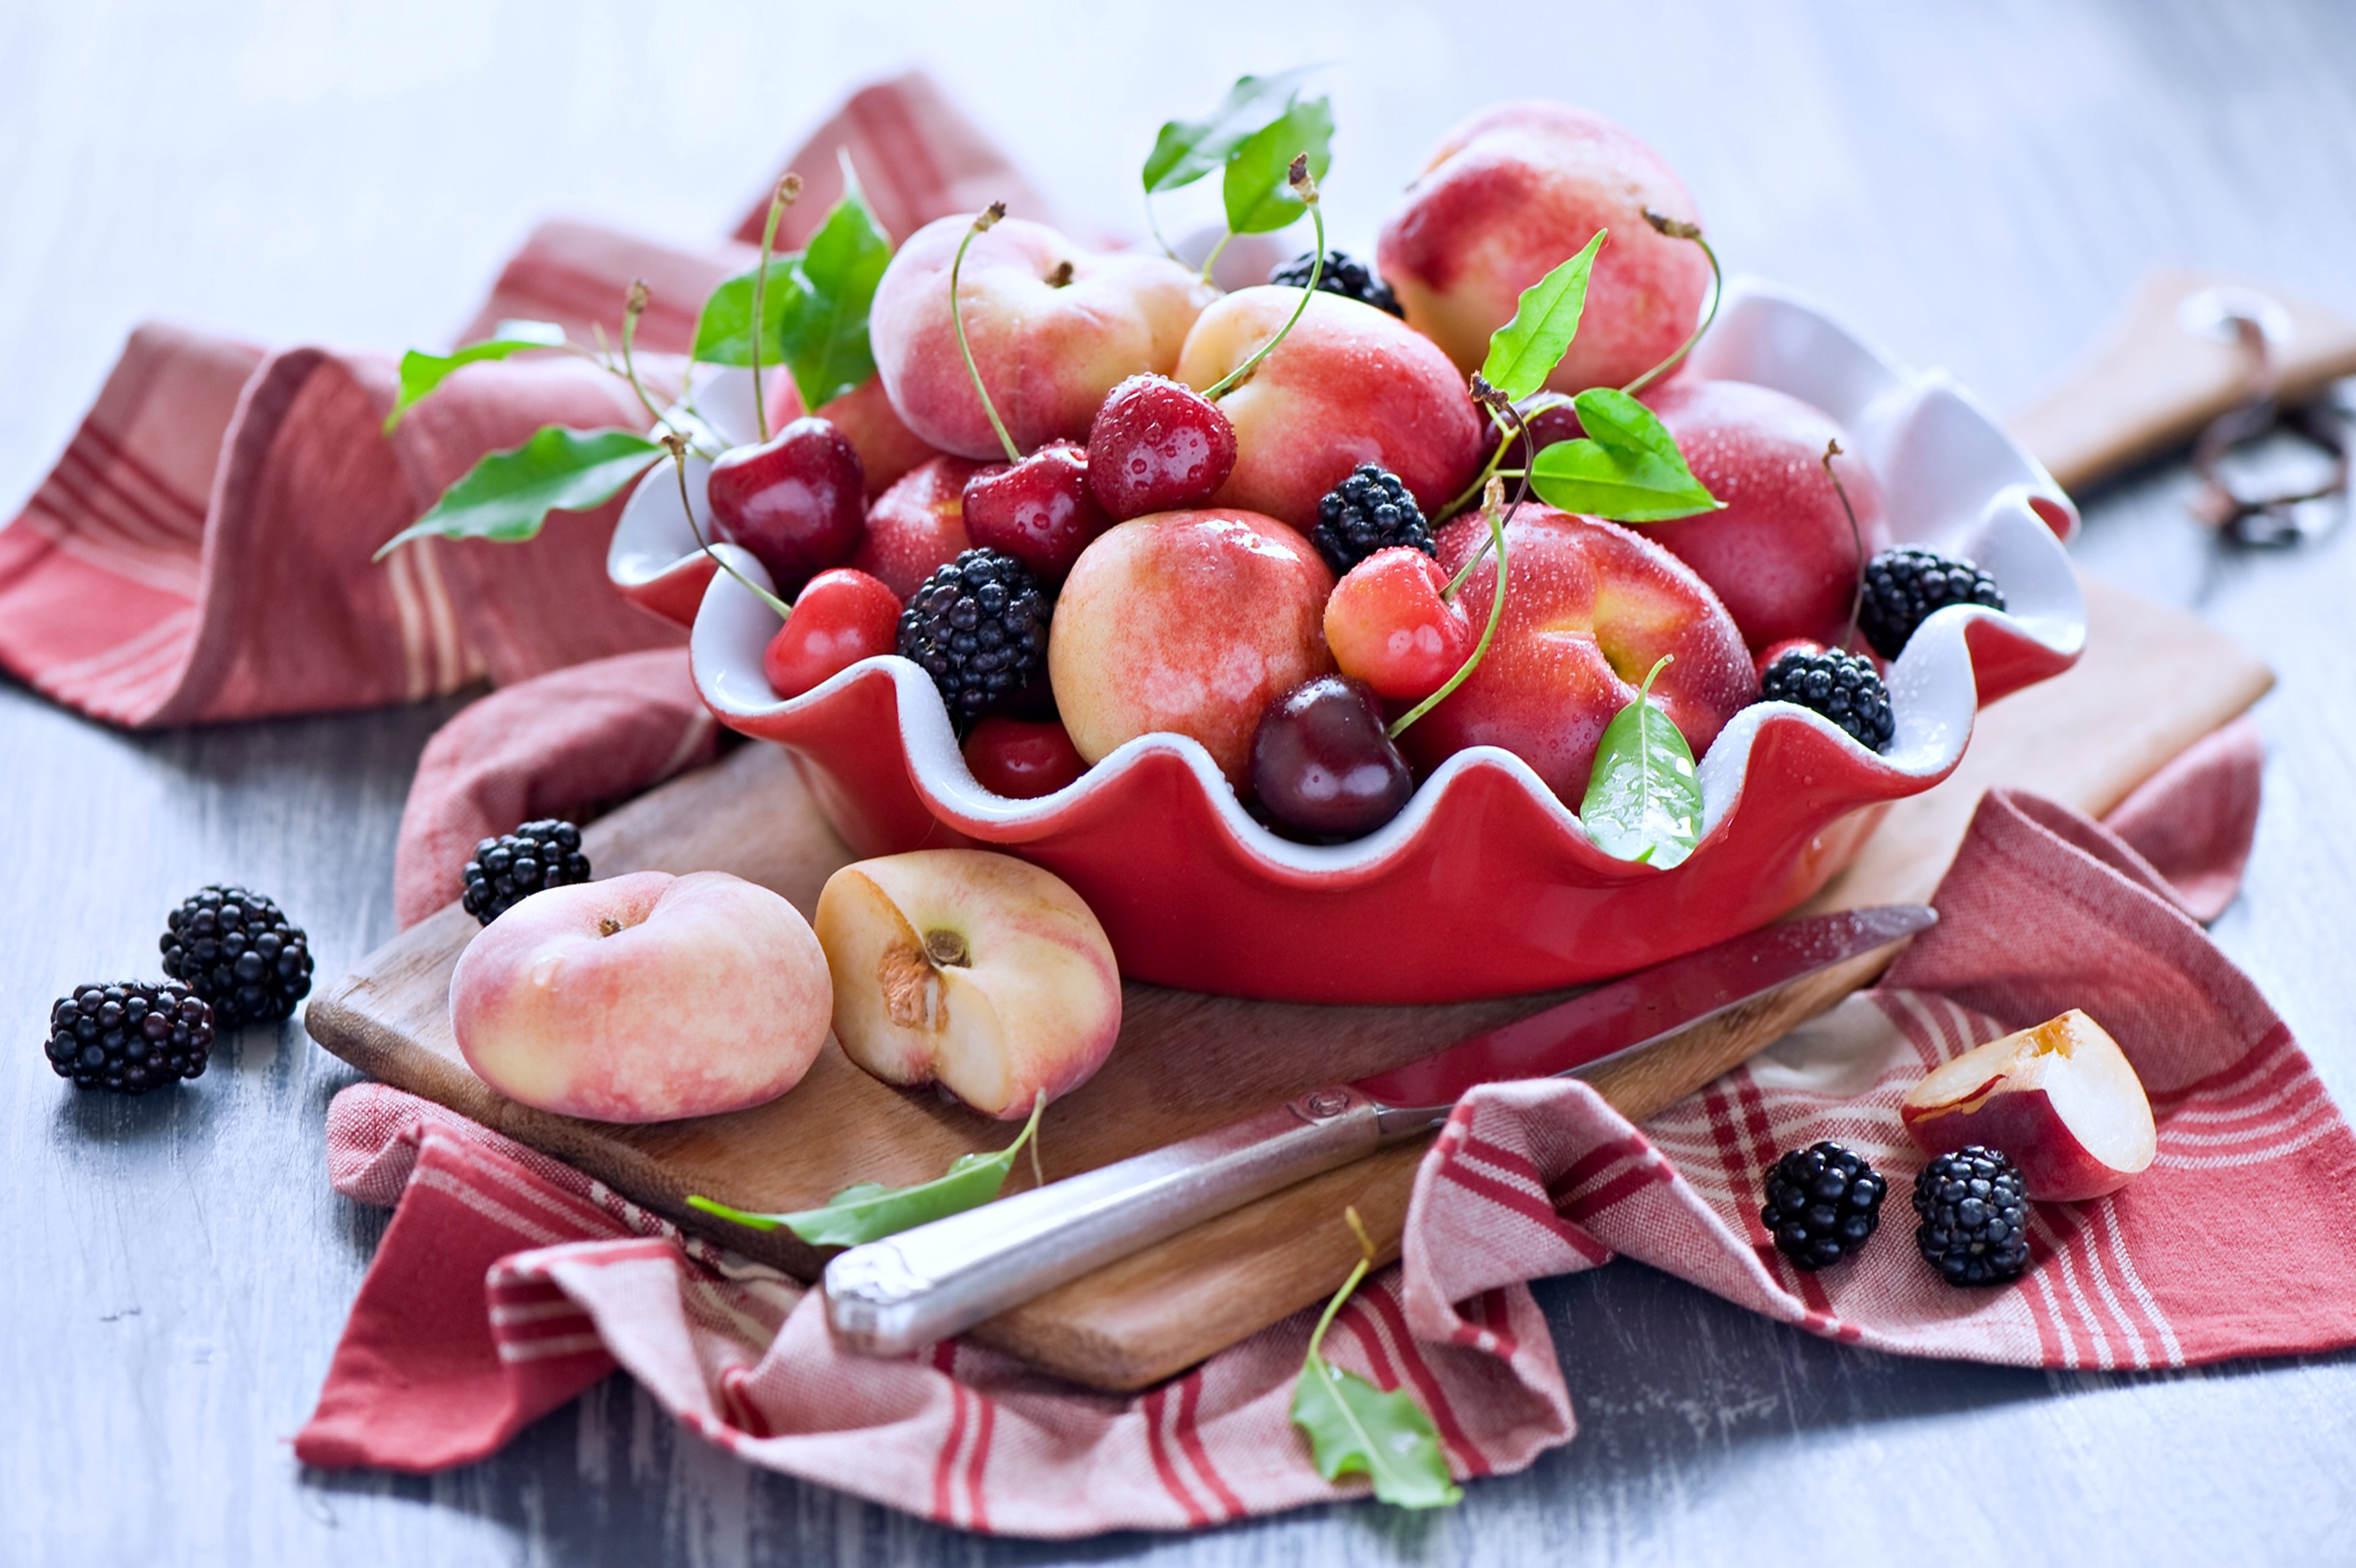 fruit, Basket, Grape, Strawberry, Apple, Watermelon, Blueberry, Cherry, Nature, Food, Delicious, Sweet, Summer, Table, Cocktail Wallpaper